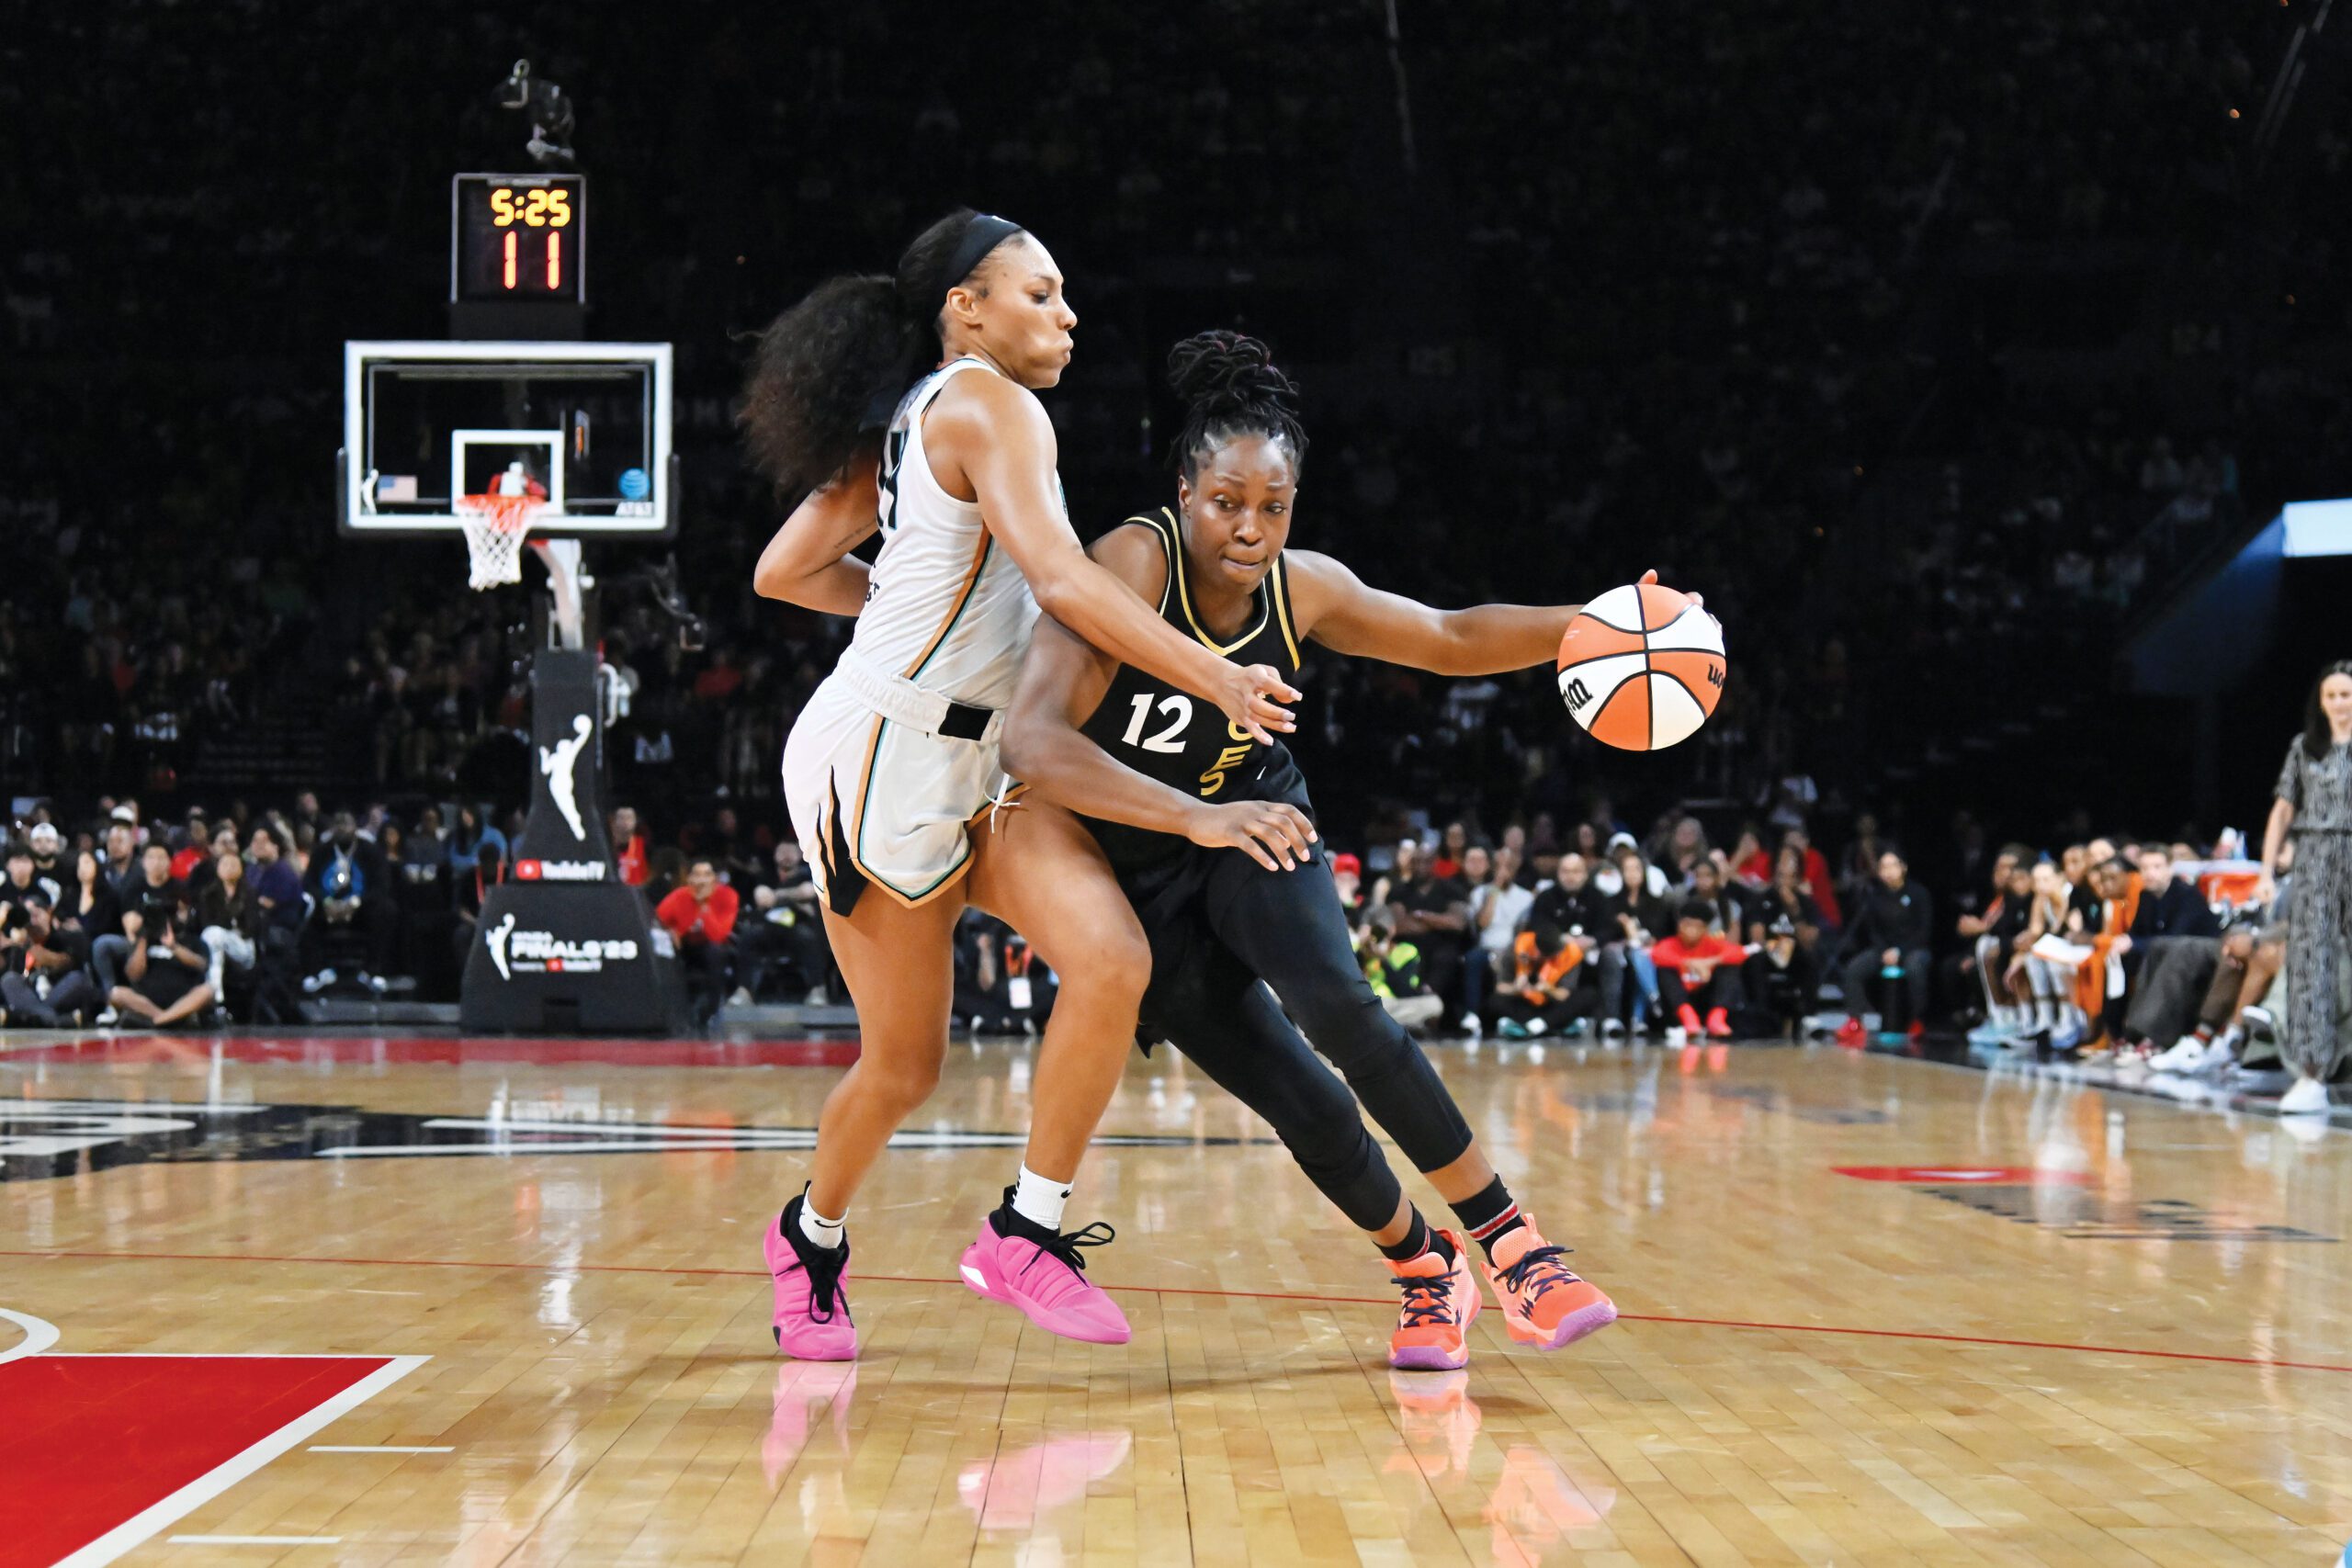 Aces become 1st repeat WNBA champs since 2002 with 1-point win